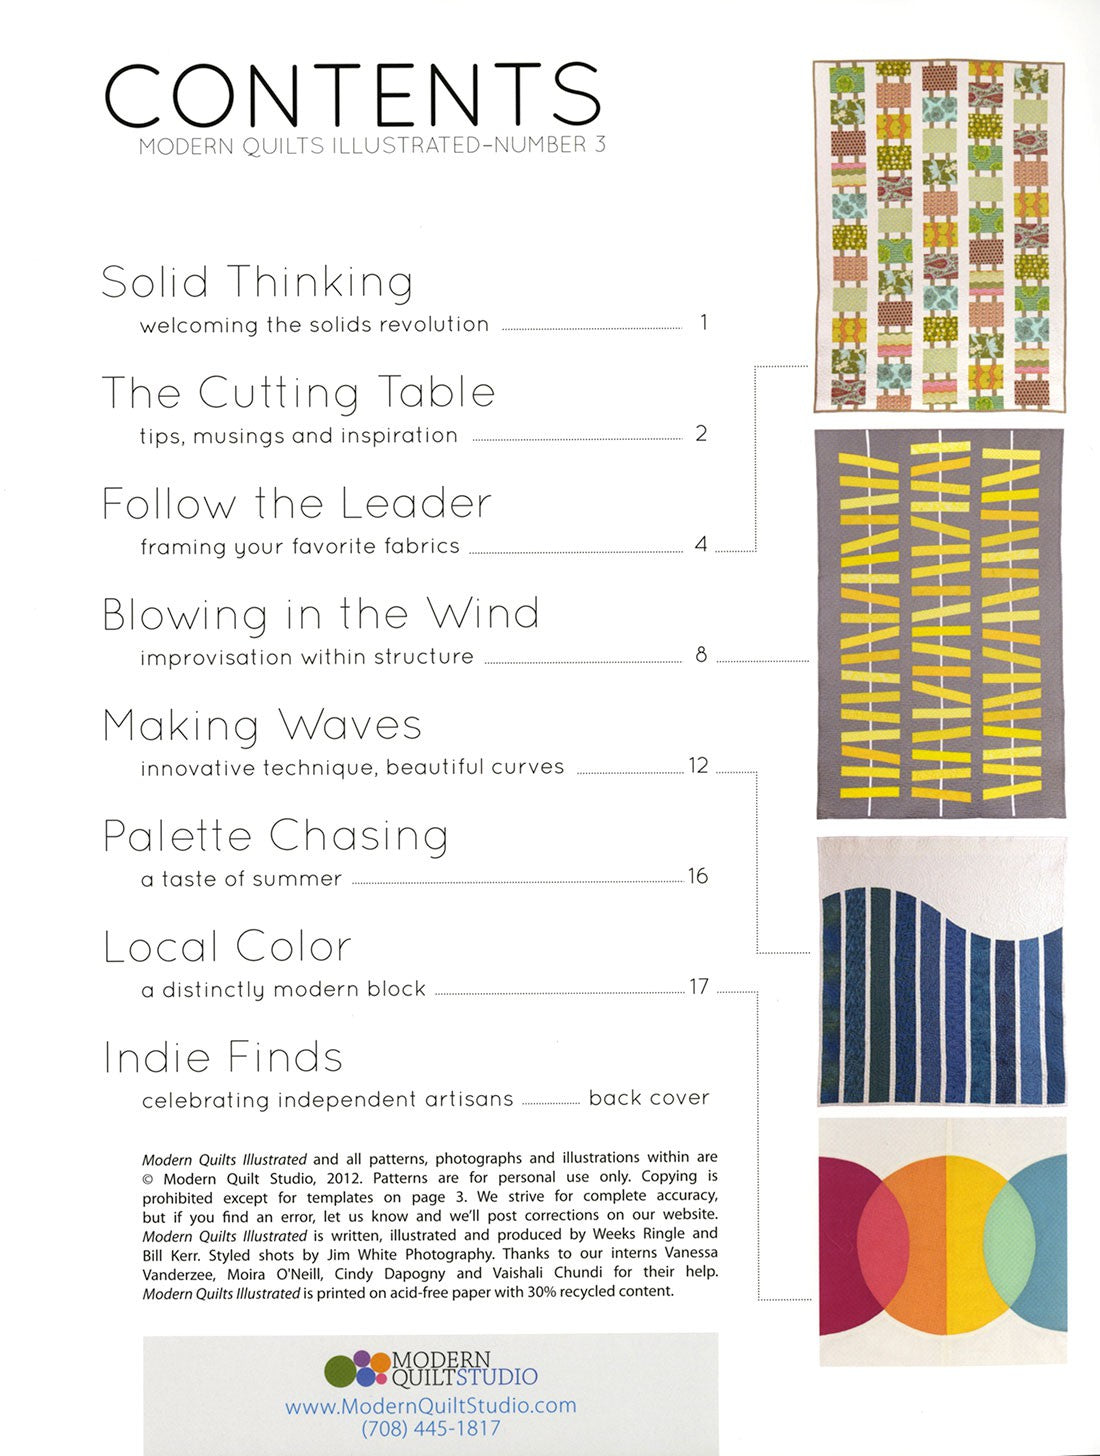 Modern Quilts Illustrated #3